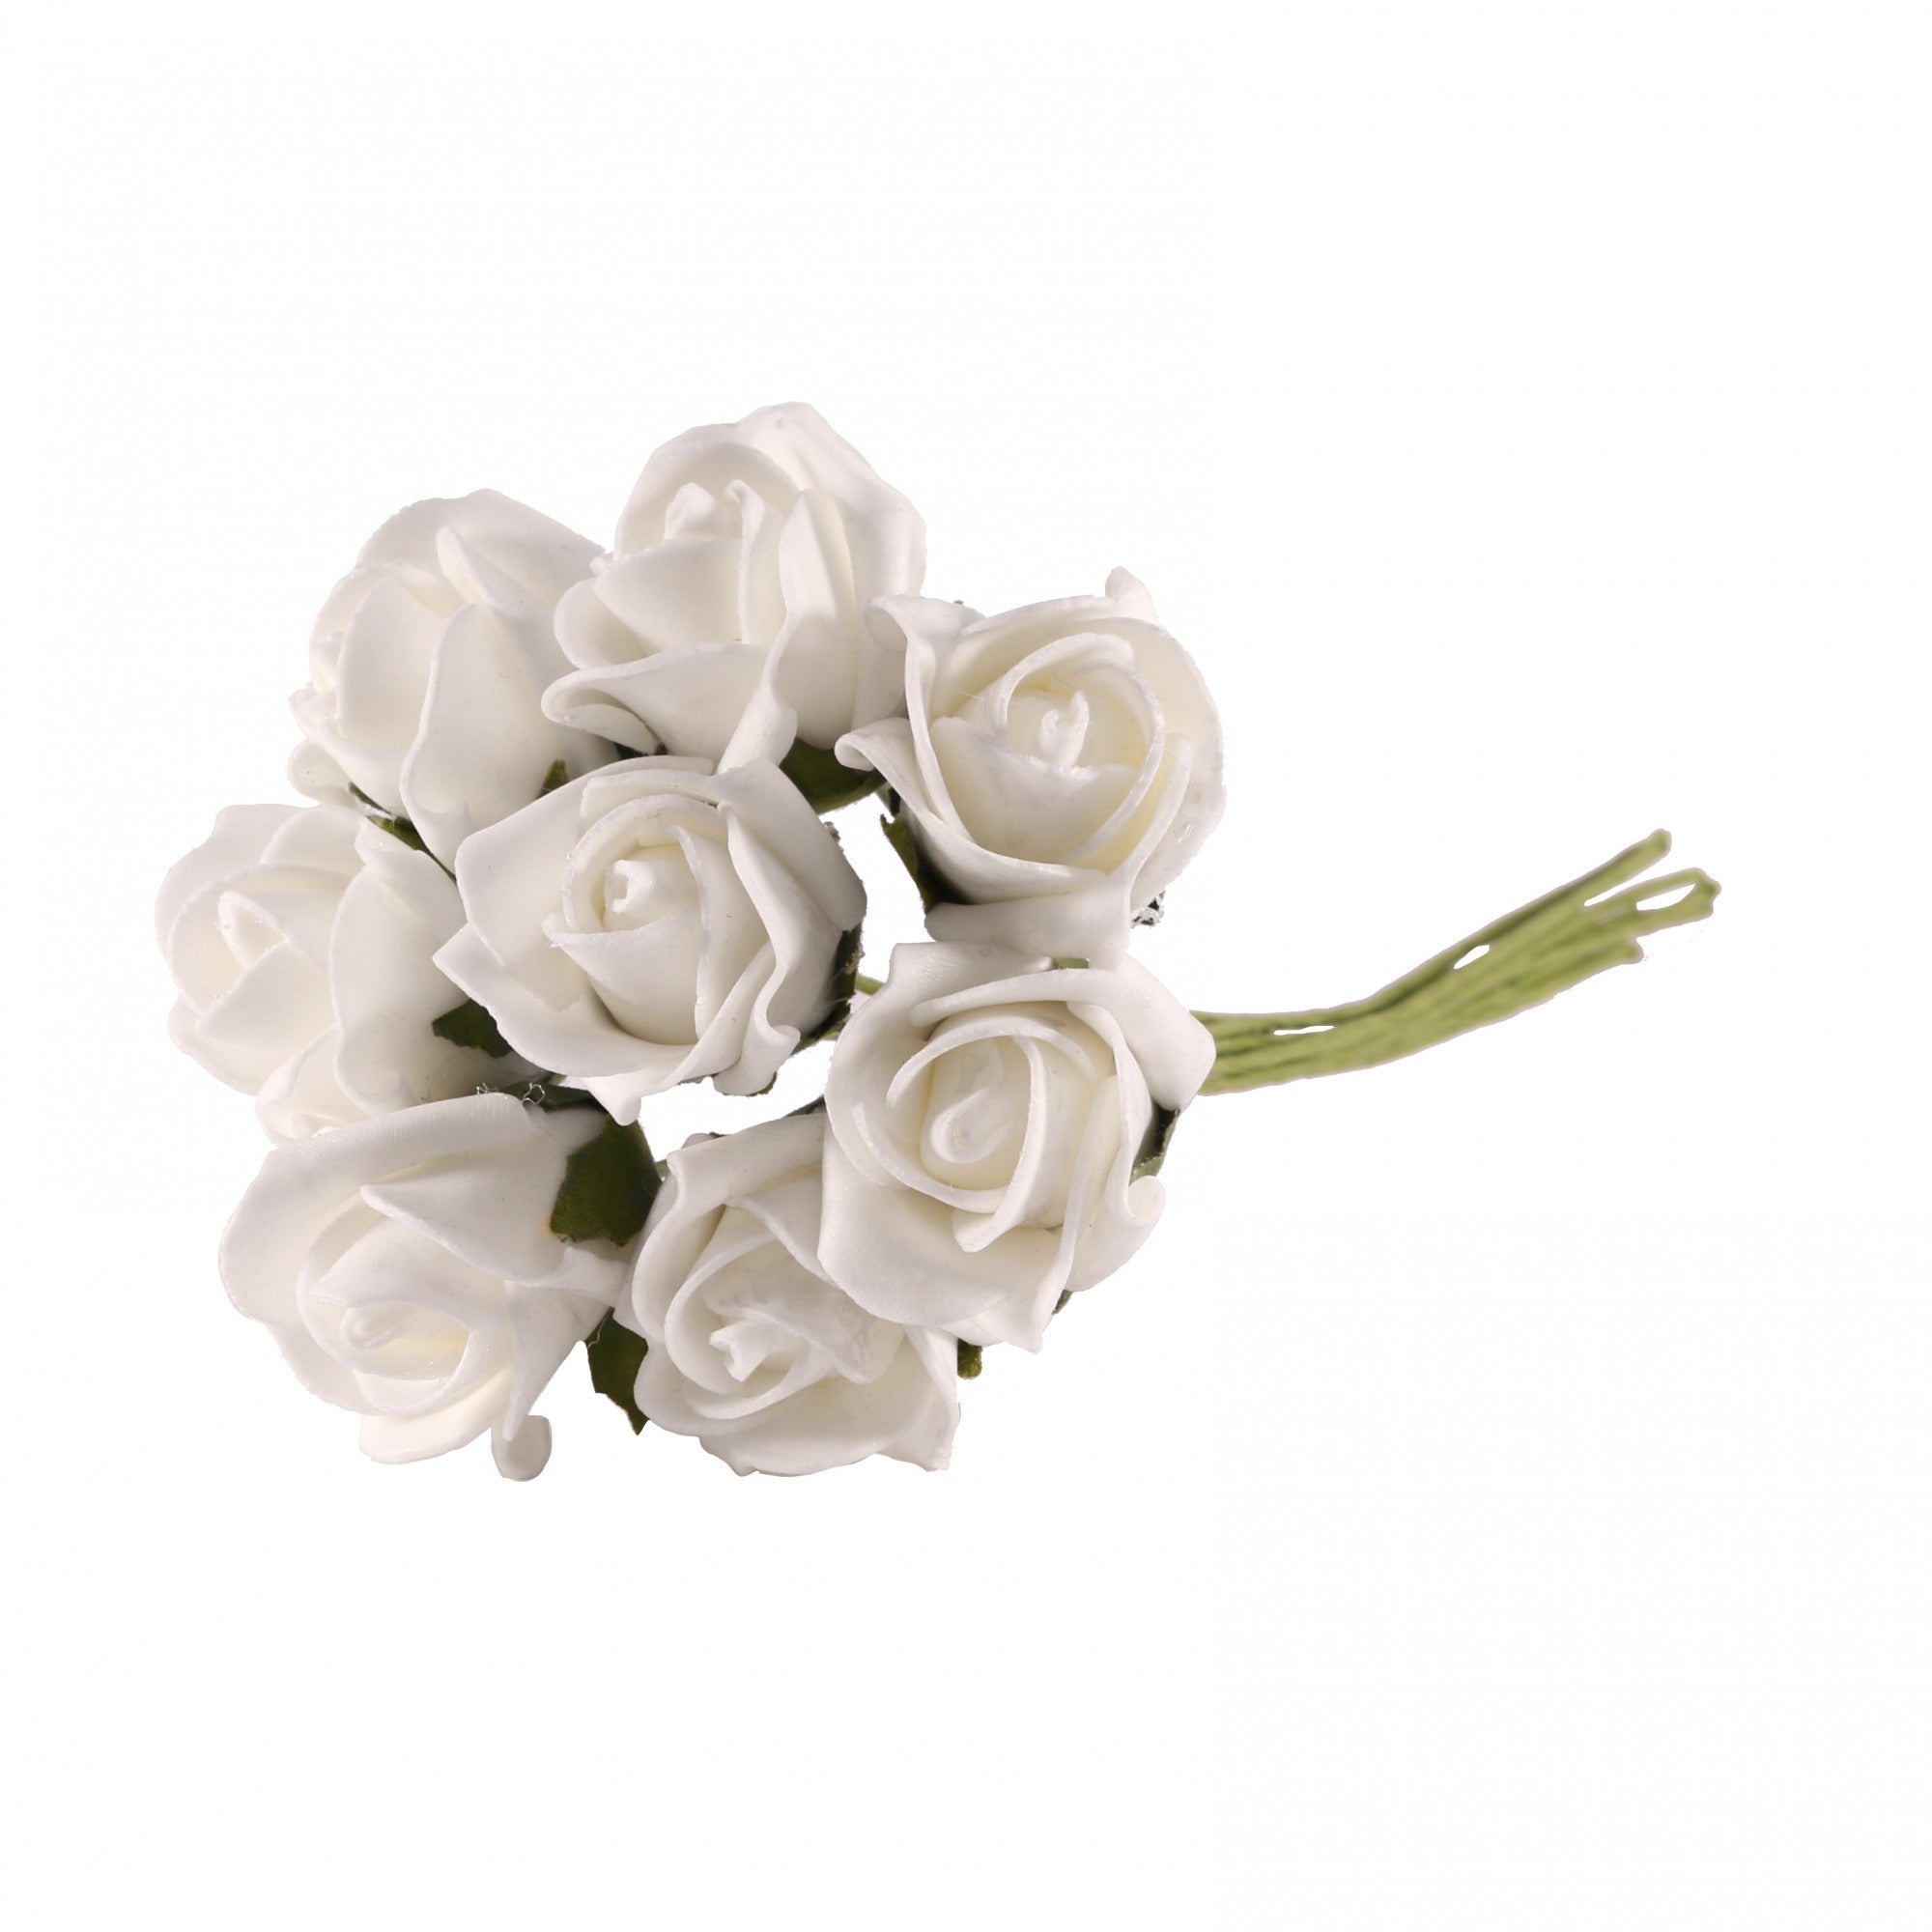 View Bunch of 8 Bright White Foam Tea Rose Bud information